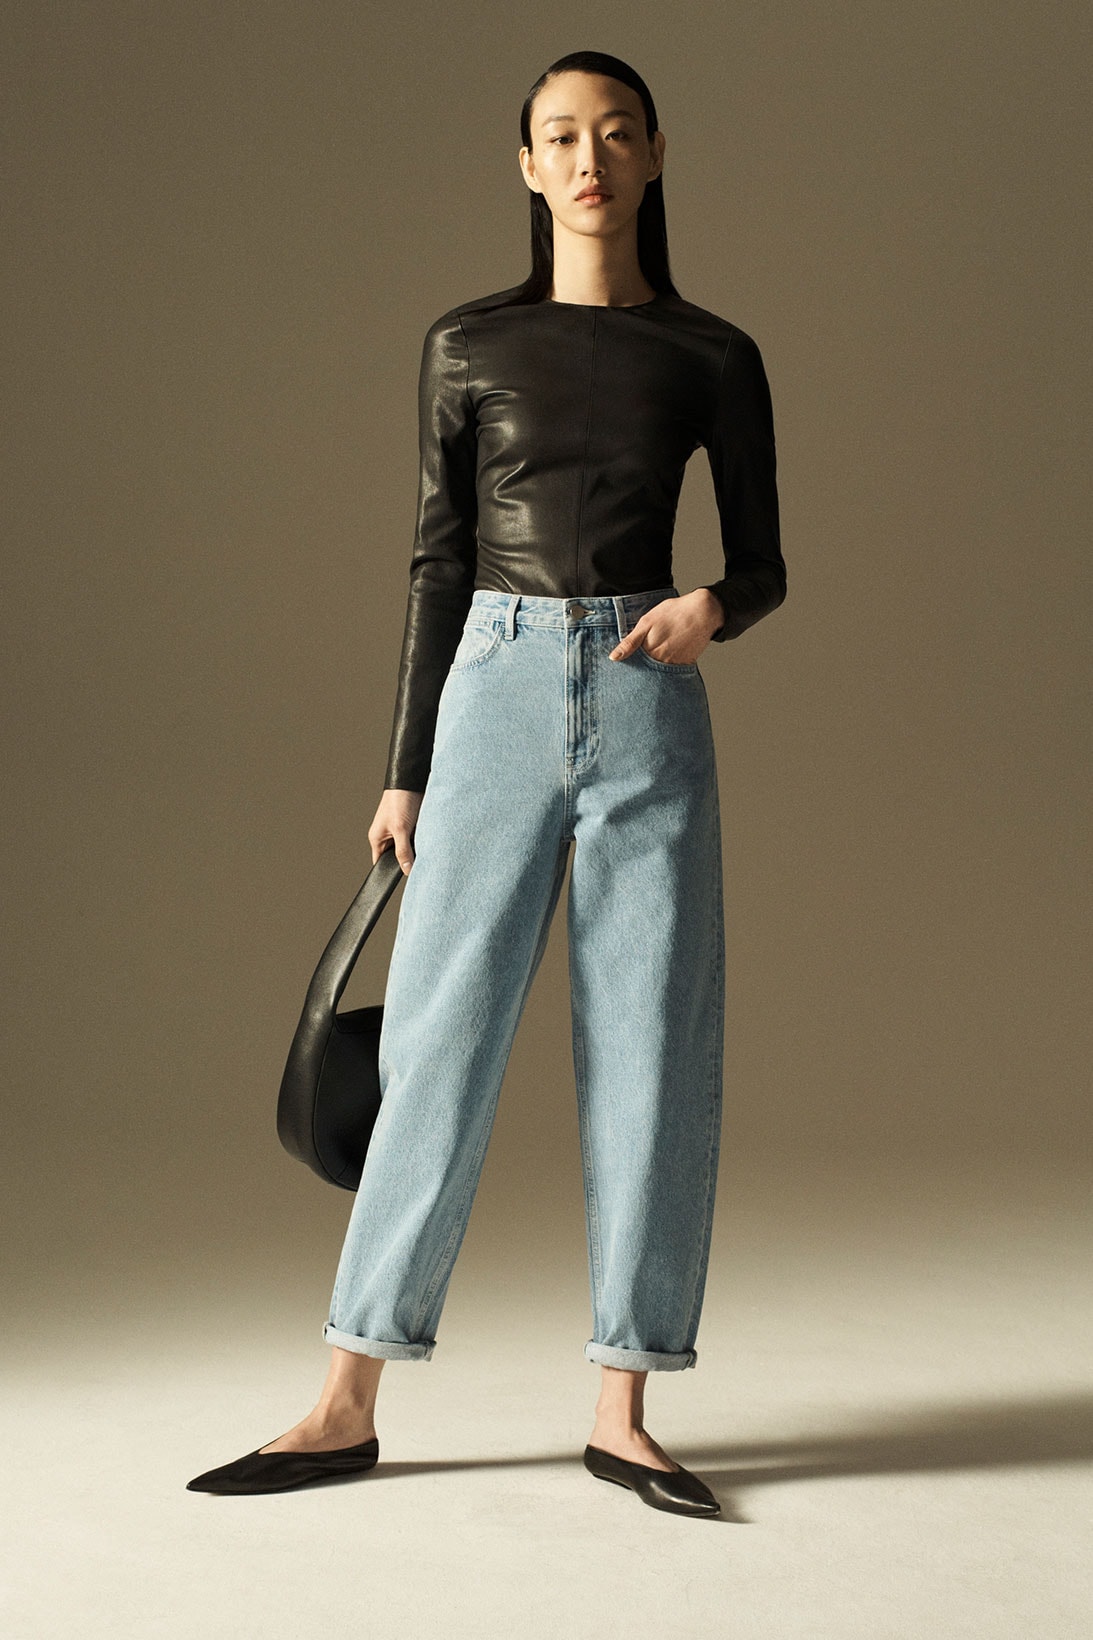 cos spring summer 2021 ss21 sustainable denim collection jeans sora choi leather long sleeved tee shirt bag